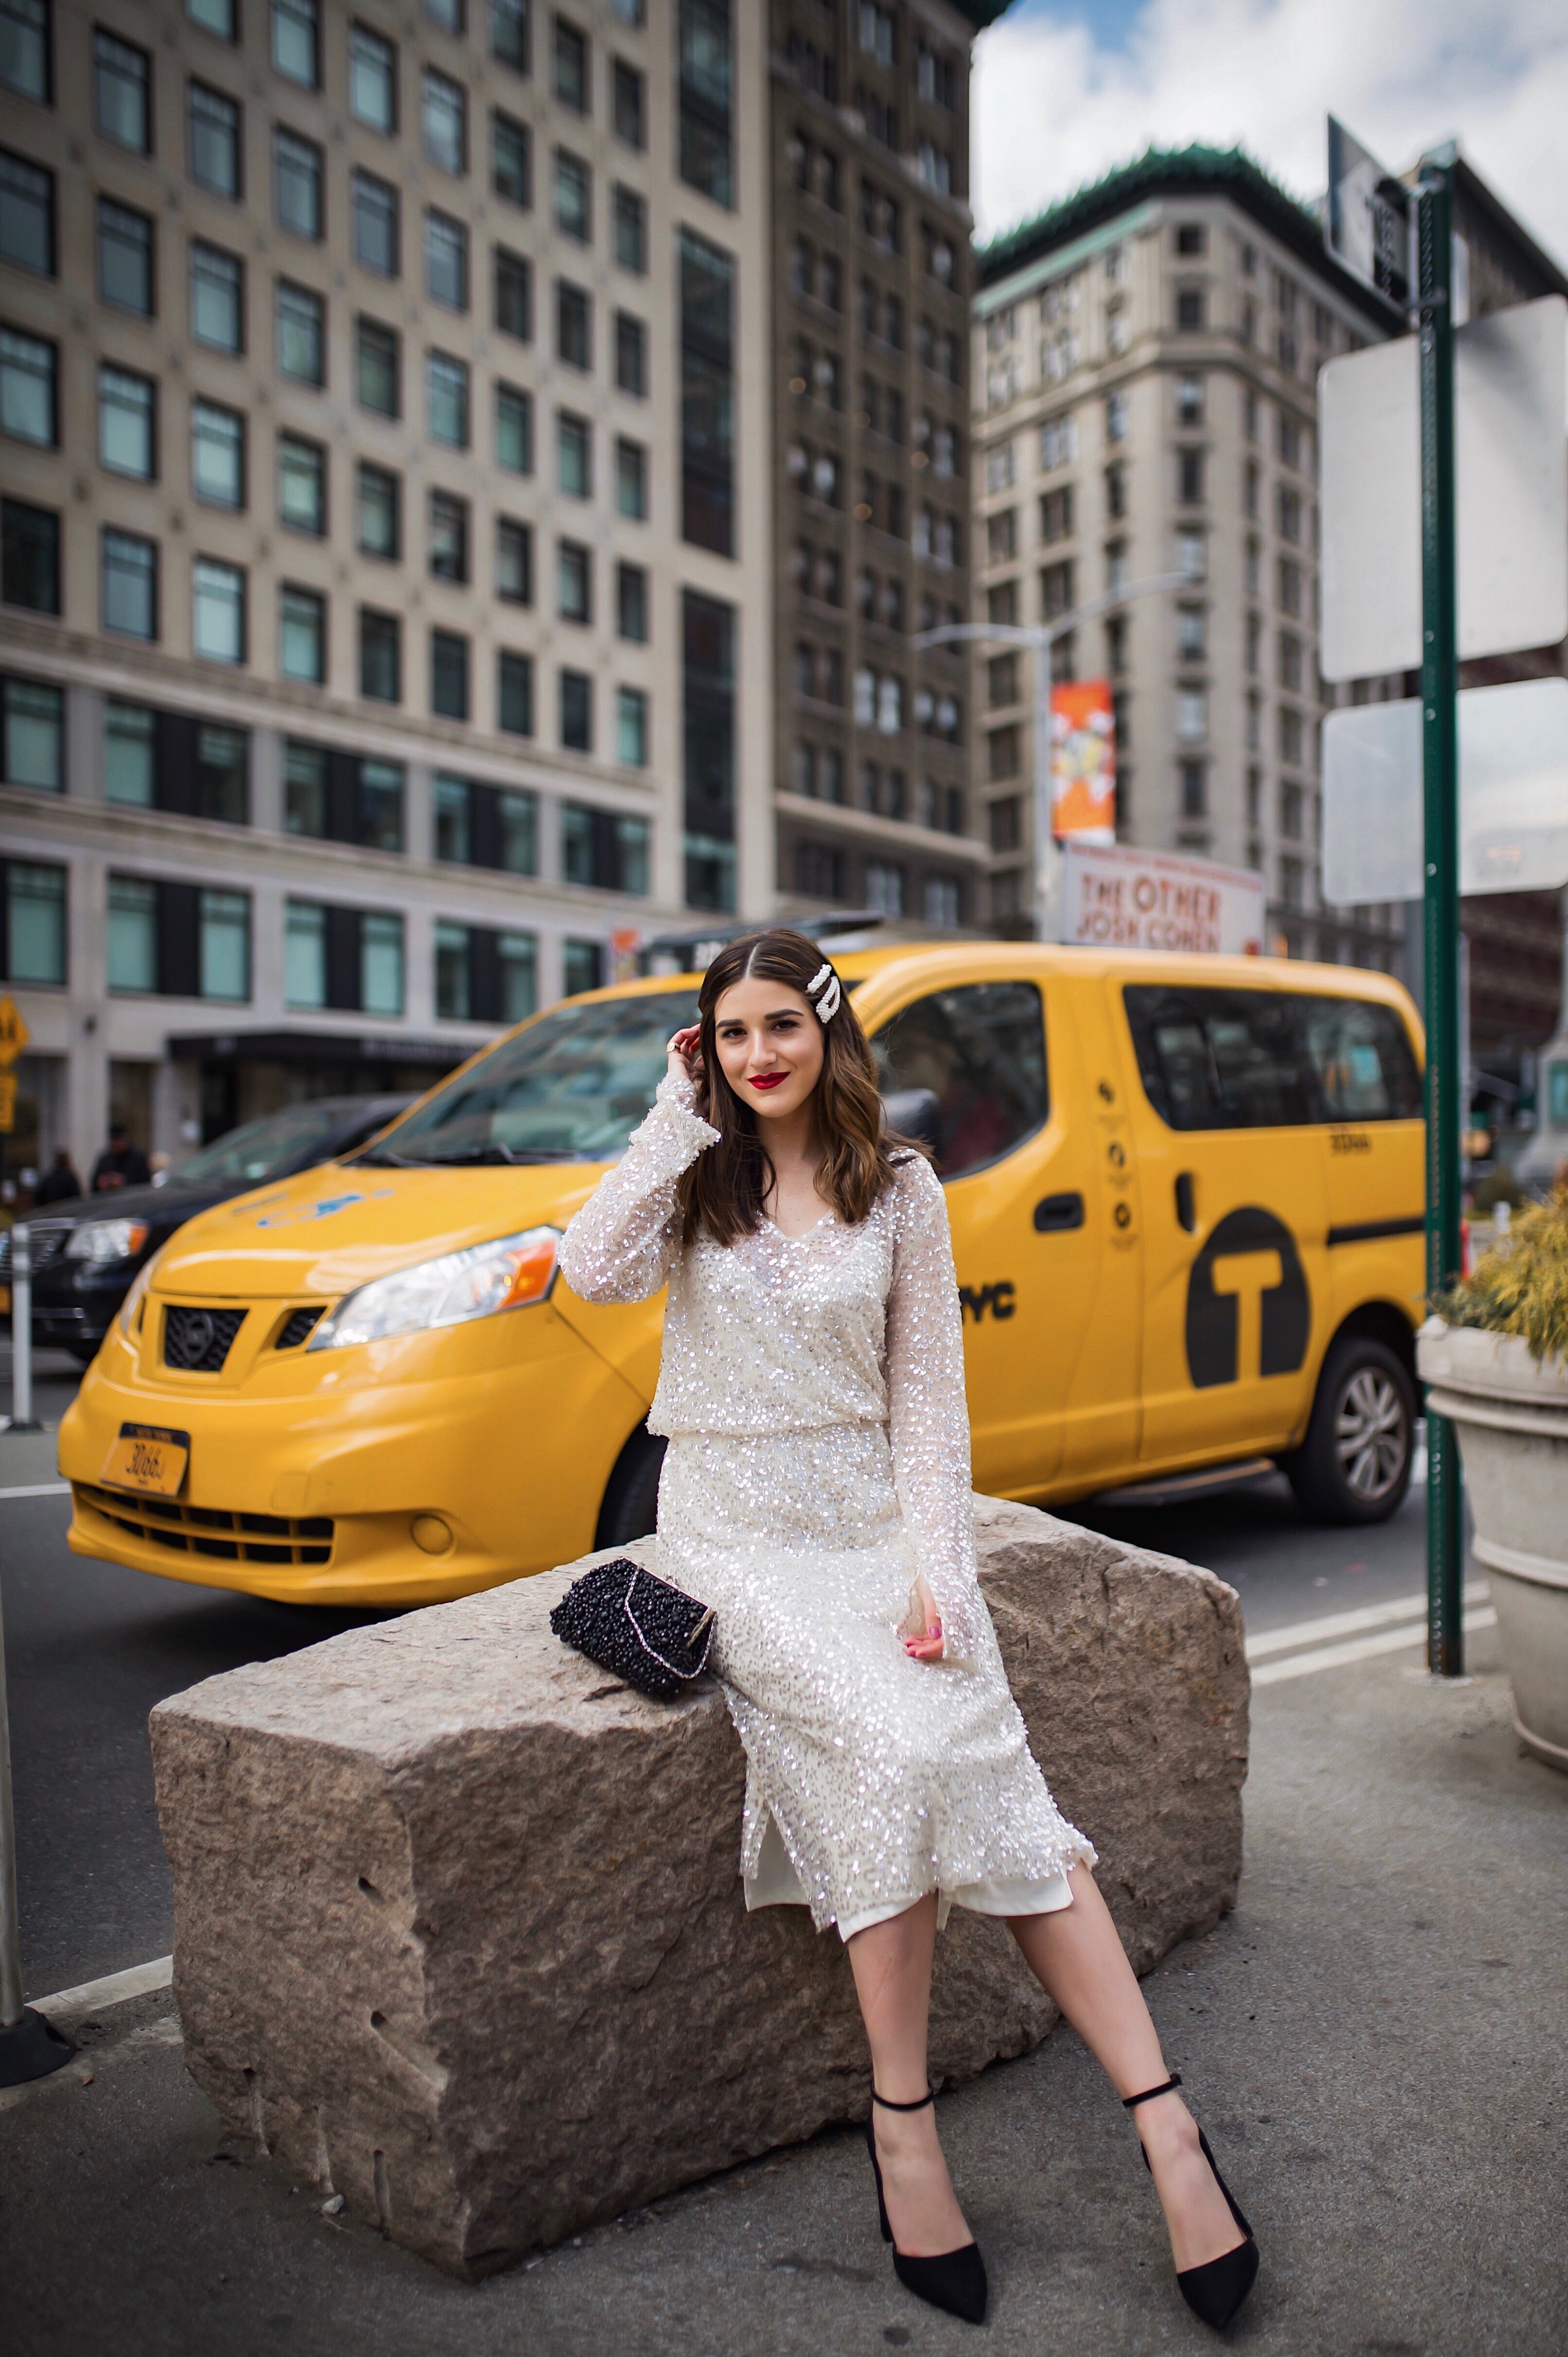 10 Ways To Be An Amazing Houseguest Sequined Midi Dress Black Heels Esther Santer Fashion Blog NYC Street Style Blogger Outfit OOTD Trendy Shopping Girl What How To Wear Beaded Clutch Pearl Hair Clips Zara Asos Taxi  Shot Photoshoot Inspo Bag Pretty.JPG